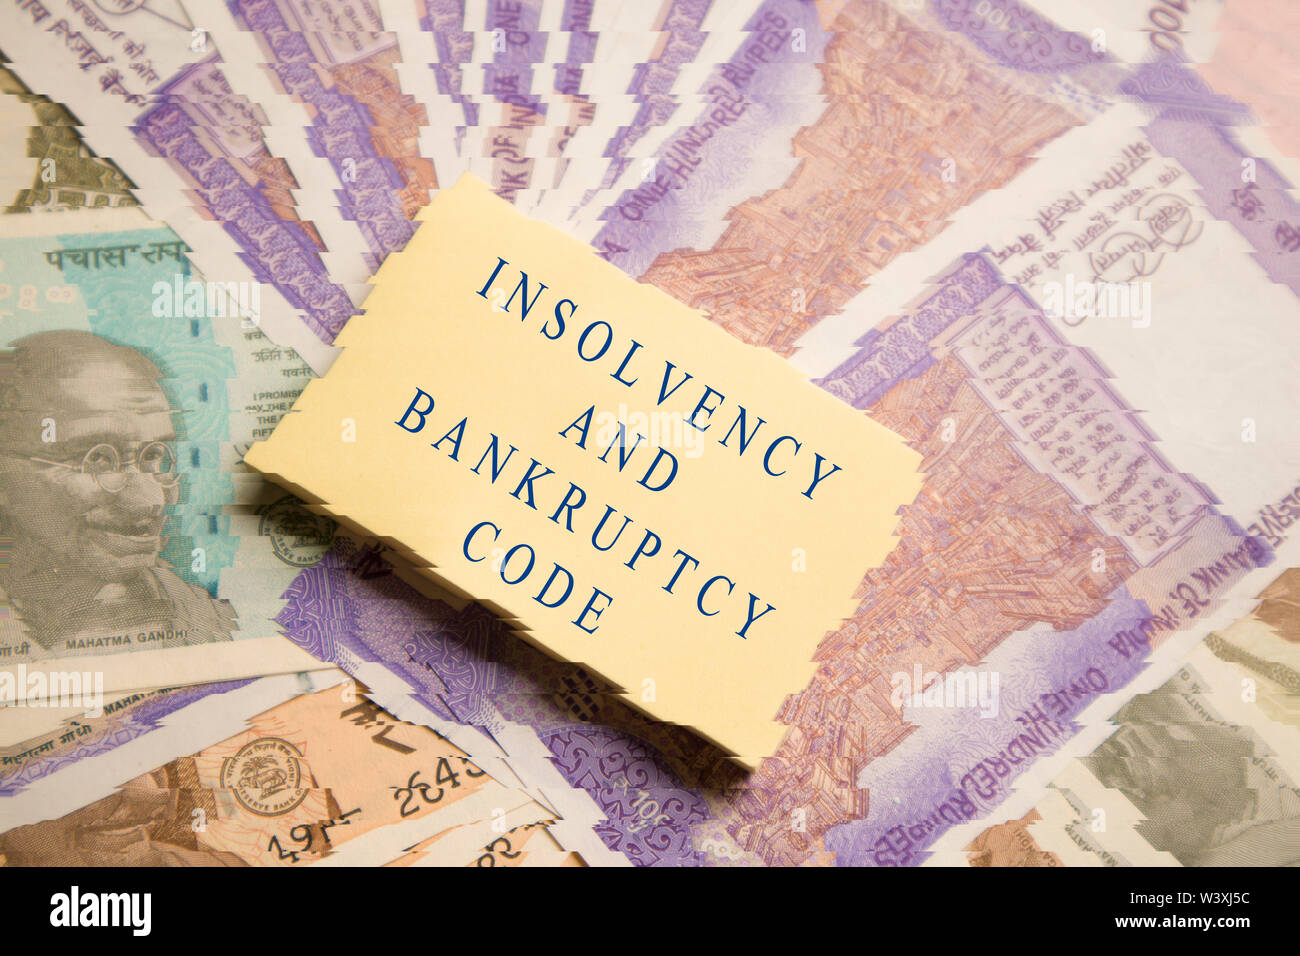 Concept of Insolvency and Bankruptcy Code or law on Indain currency Notes Stock Photo